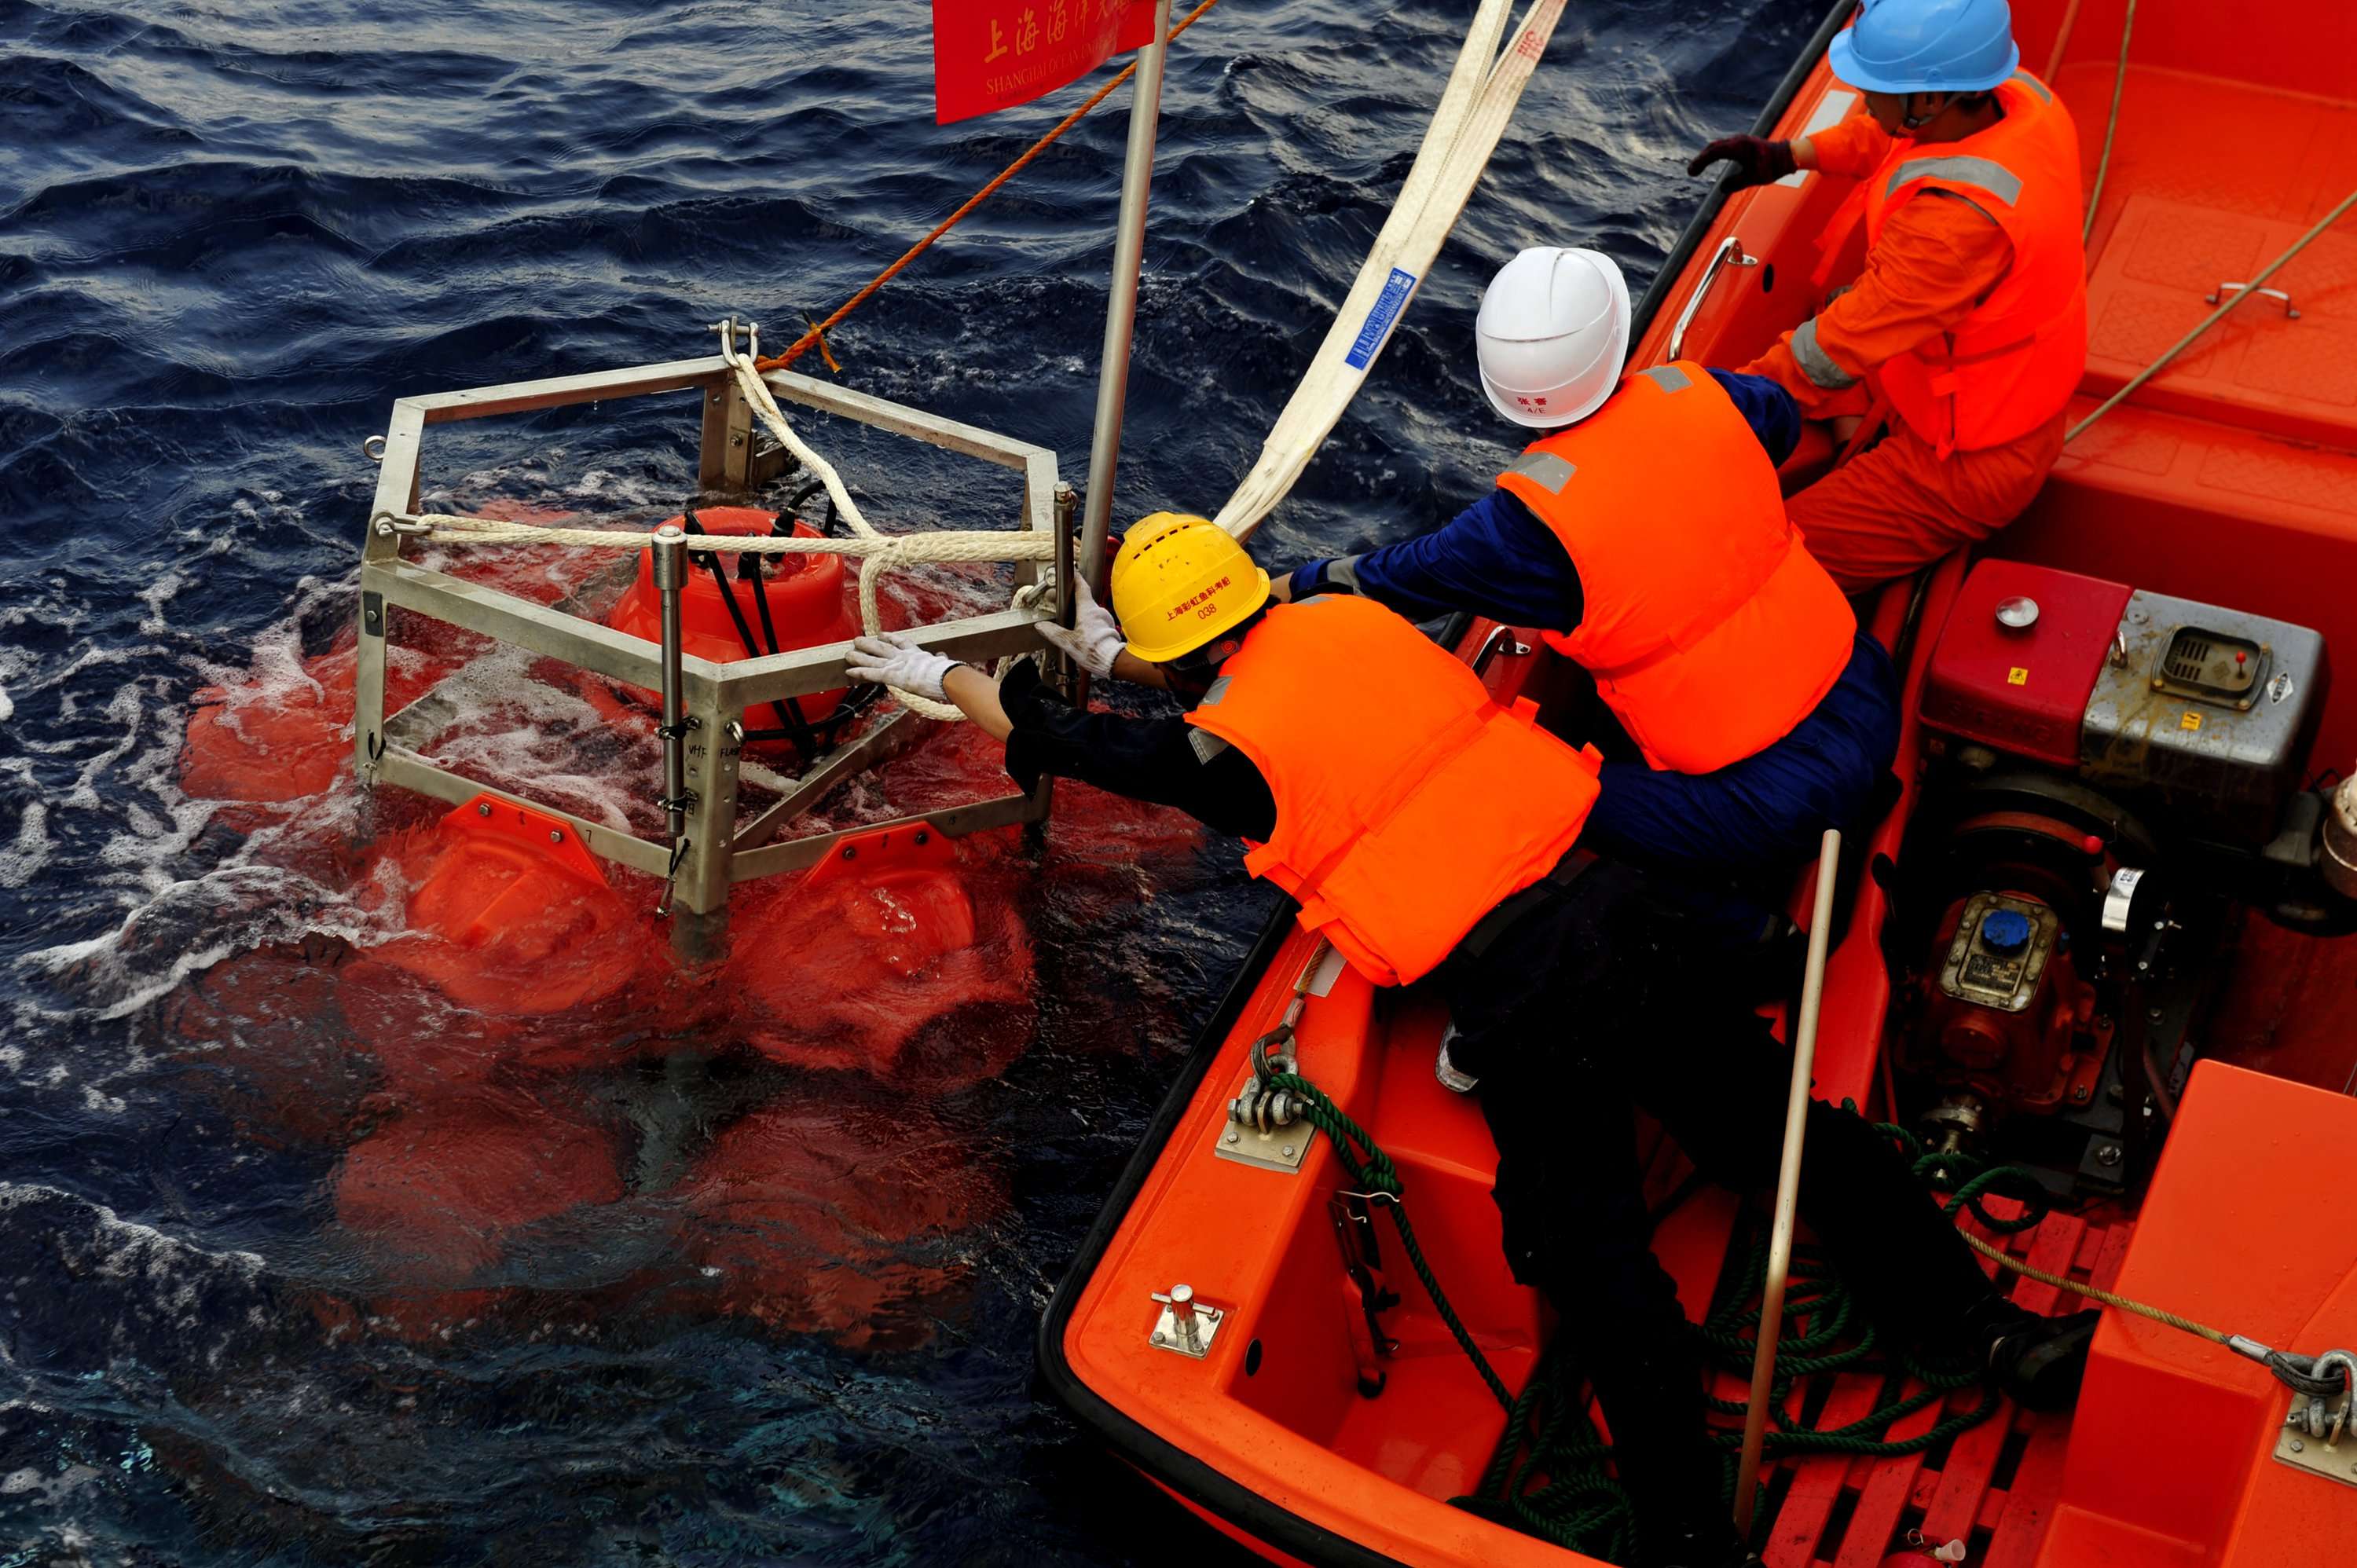 Crew on the research vessel Zhang Jian retrieve a submersible capable of diving up to 11,000 metres, in the South China Sea. Photo: Xinhua